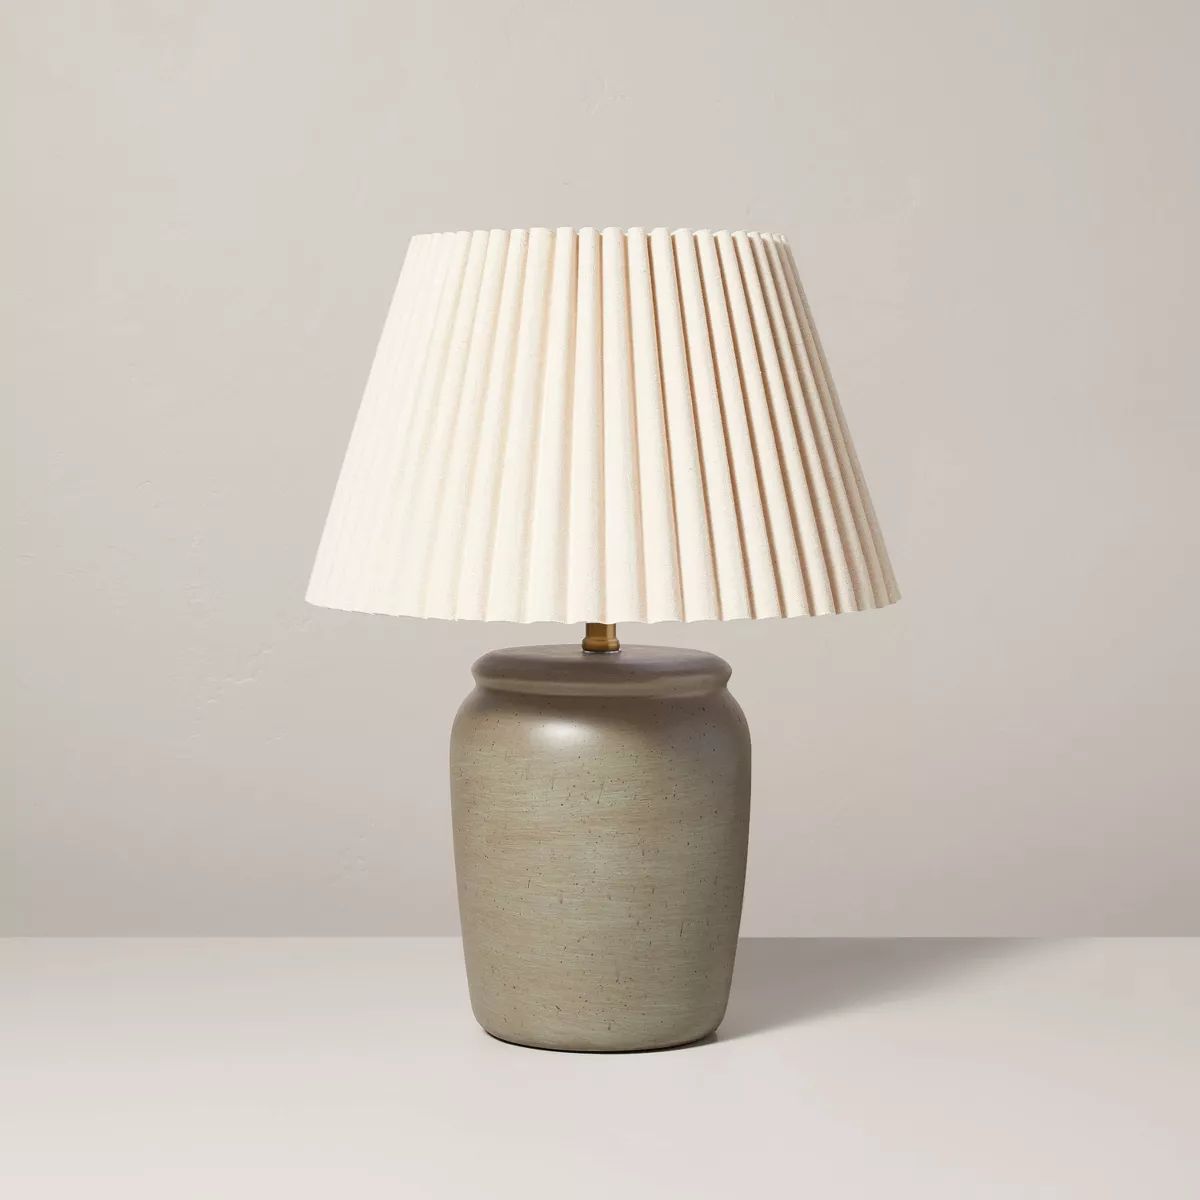 22" Pleated Shade Ceramic Table Lamp Gray/Oatmeal - Hearth & Hand™ with Magnolia | Target